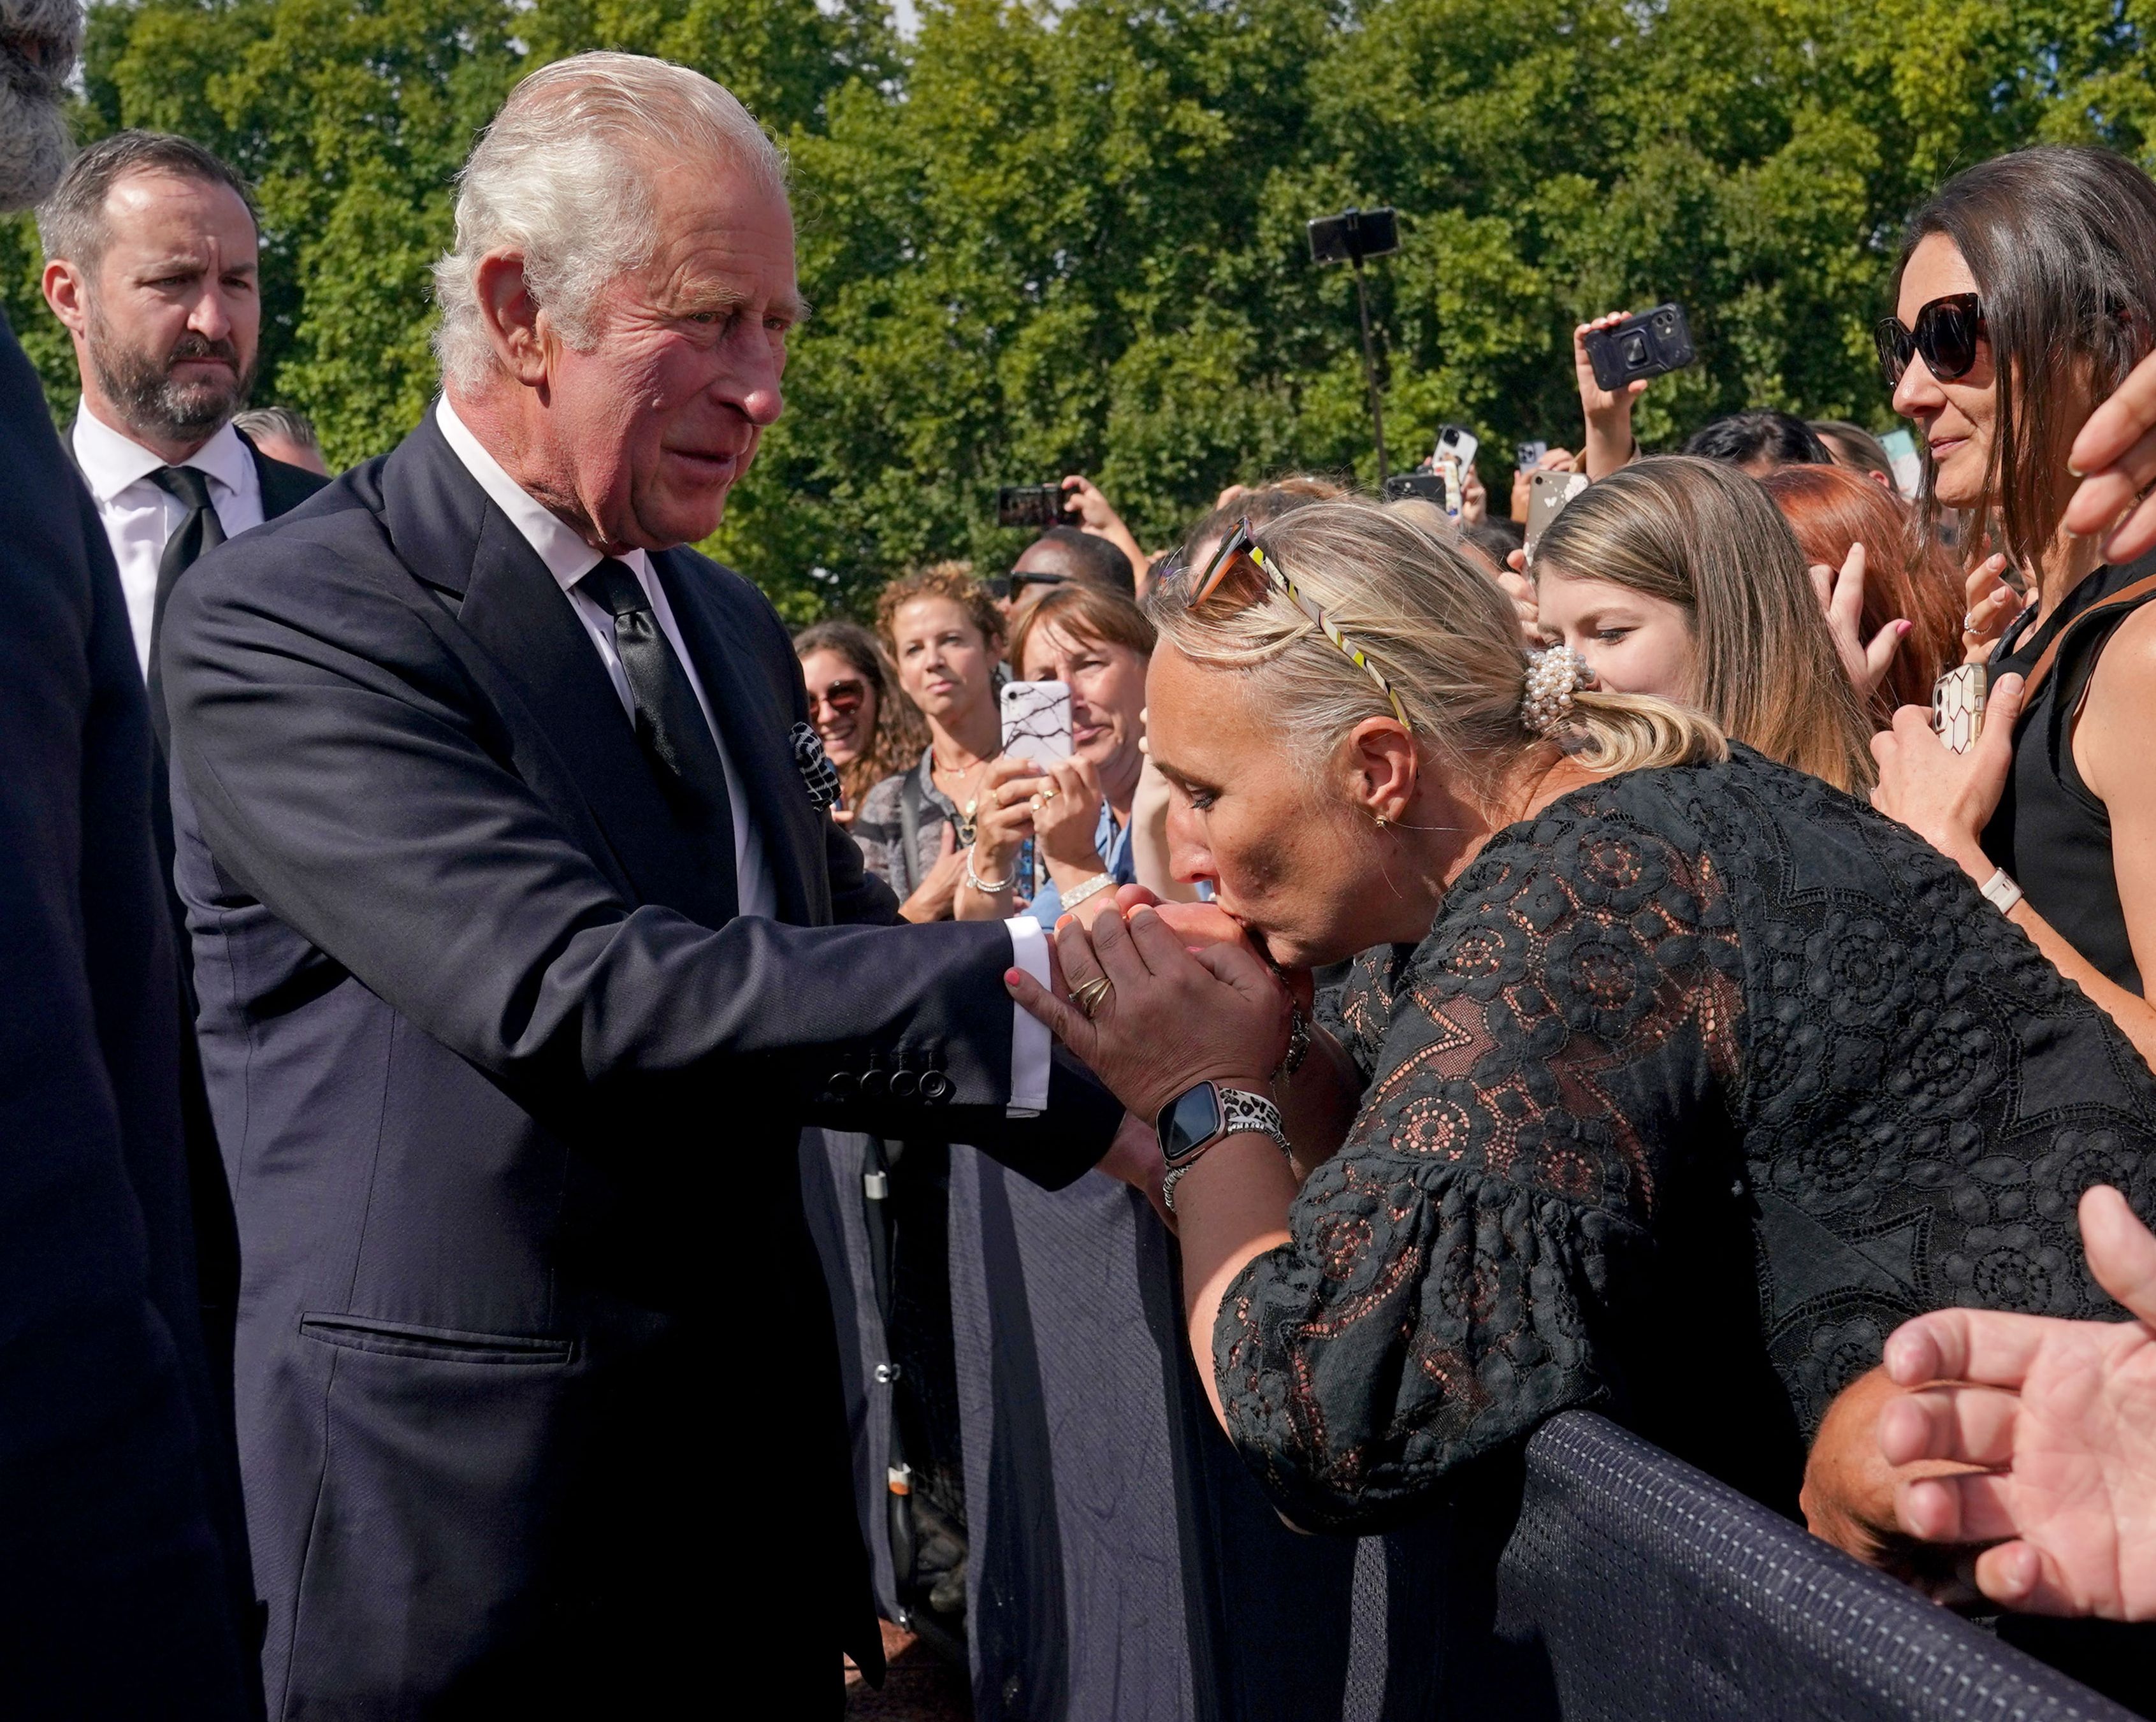 <p>A well-wisher kissed the hand of King Charles III on Sept. 9, 2022, during his walkabout outside Buckingham Palace in London to view the many messages and tributes left outside the gates following <a href="https://www.wonderwall.com/celebrity/celebrities-dignitaries-react-to-death-of-queen-elizabeth-ii-647756.gallery">the death of his mother</a>, Queen Elizabeth II, one day earlier. </p>